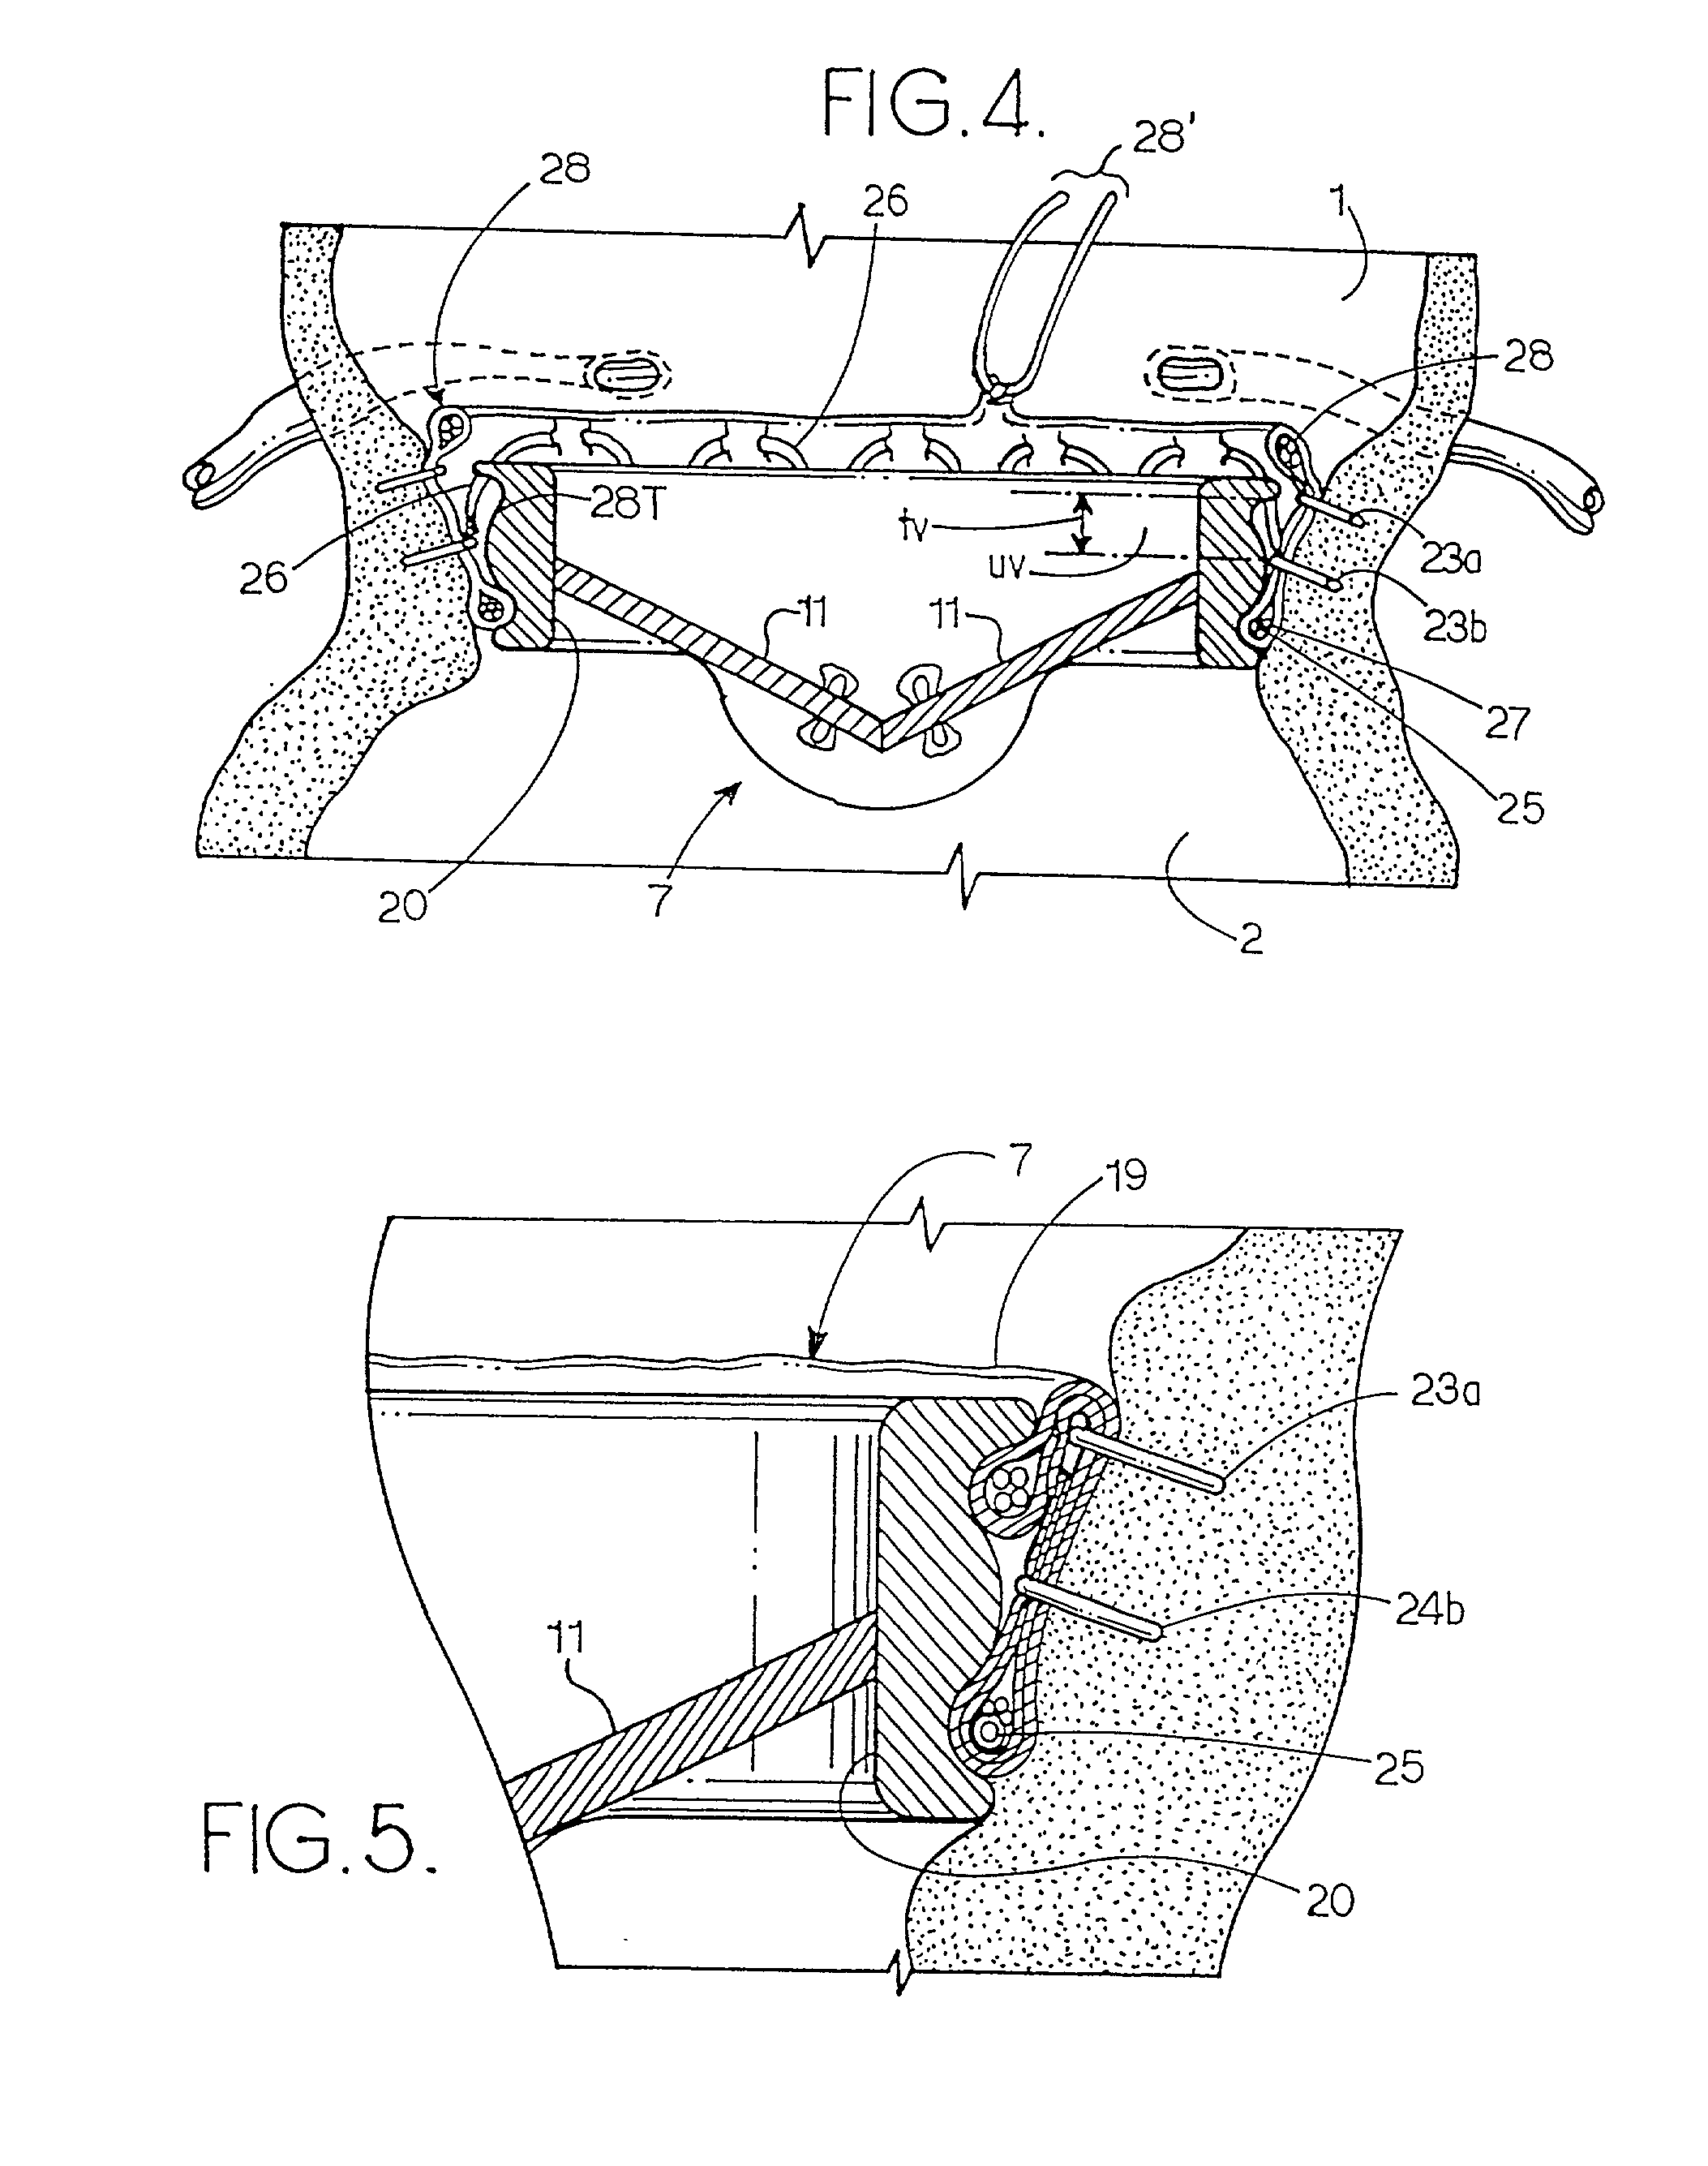 Means and method of replacing a heart valve in a minimally invasive manner